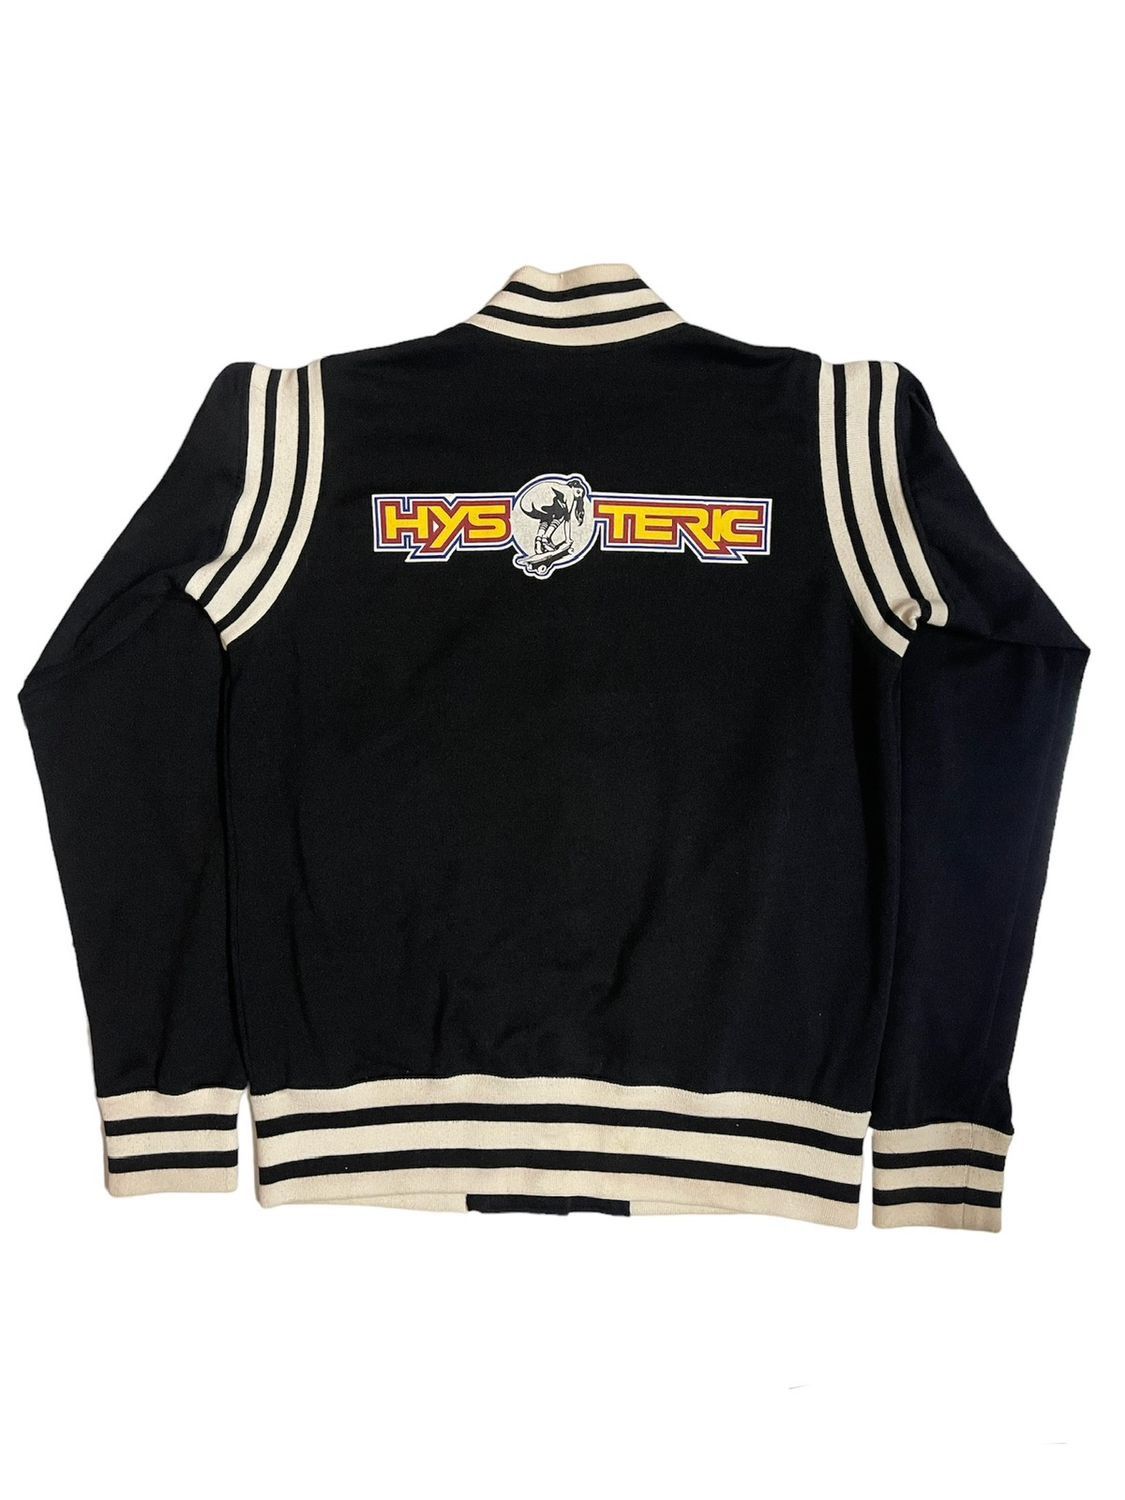 Pre-owned Hysteric Glamour X Vintage Vtg Hysteric Glamour Skater Original Clothing Varsity Jacket In Black